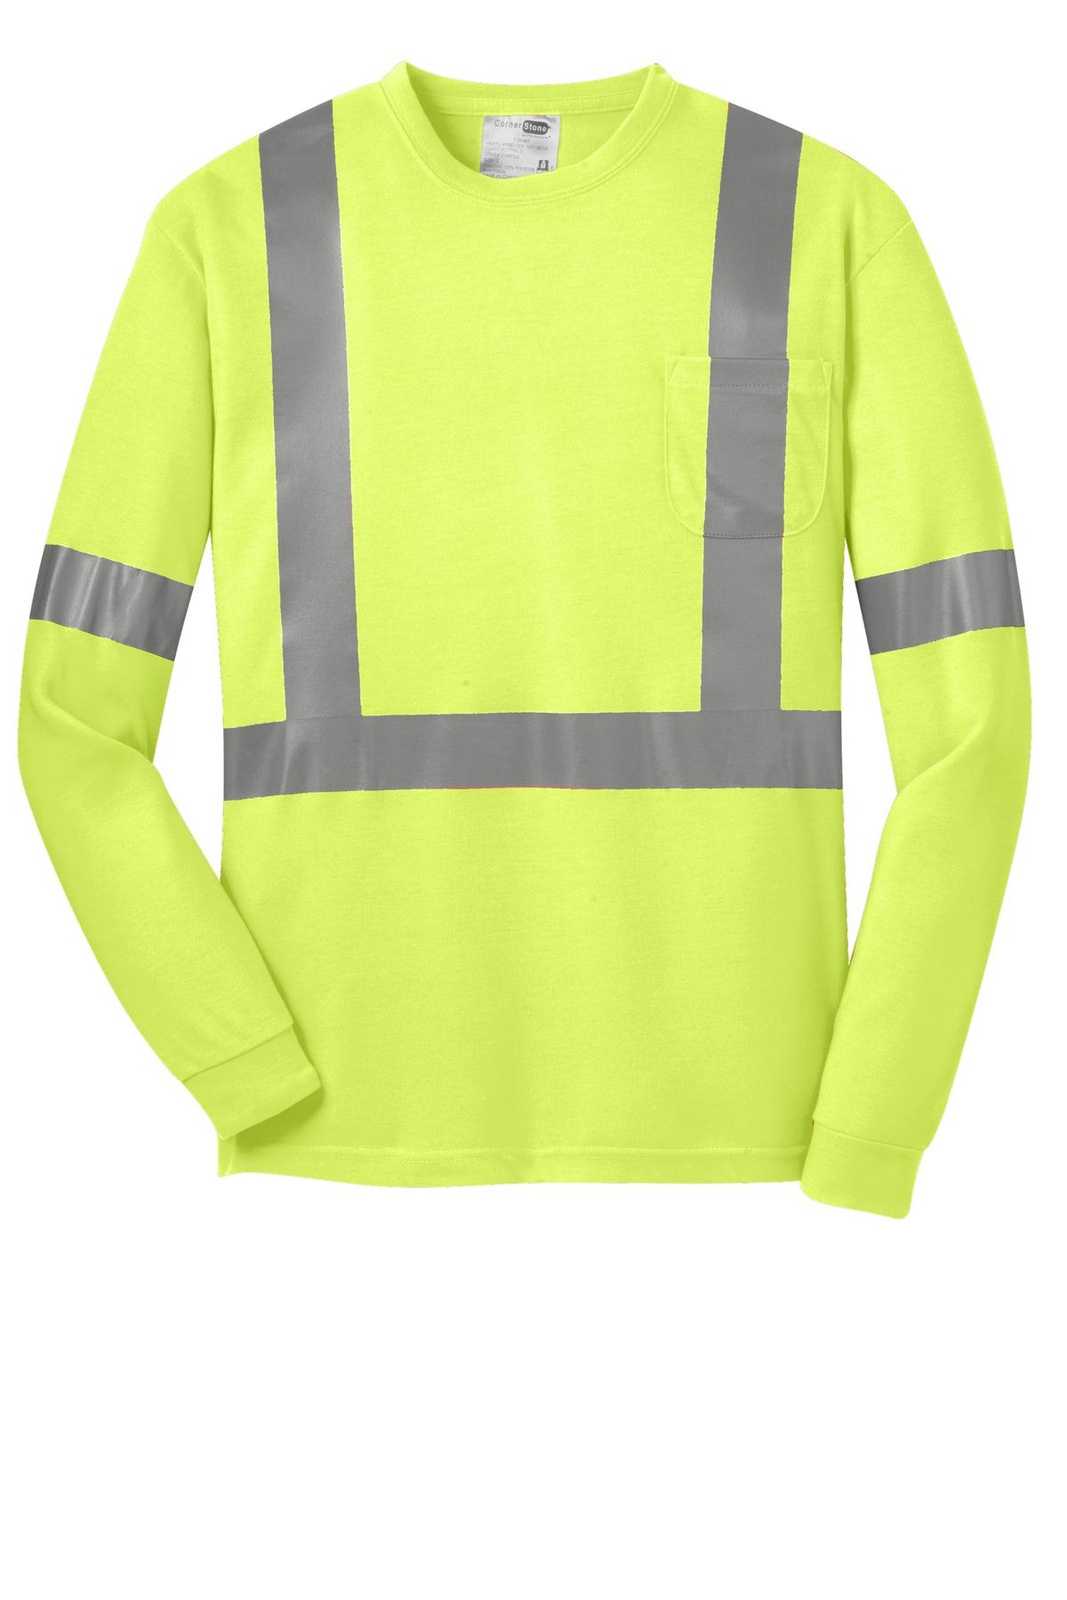 CornerStone CS401LS ANSI 107 Class 2 Long Sleeve Safety T-Shirt - Safety Yellow Reflective - HIT a Double - 5